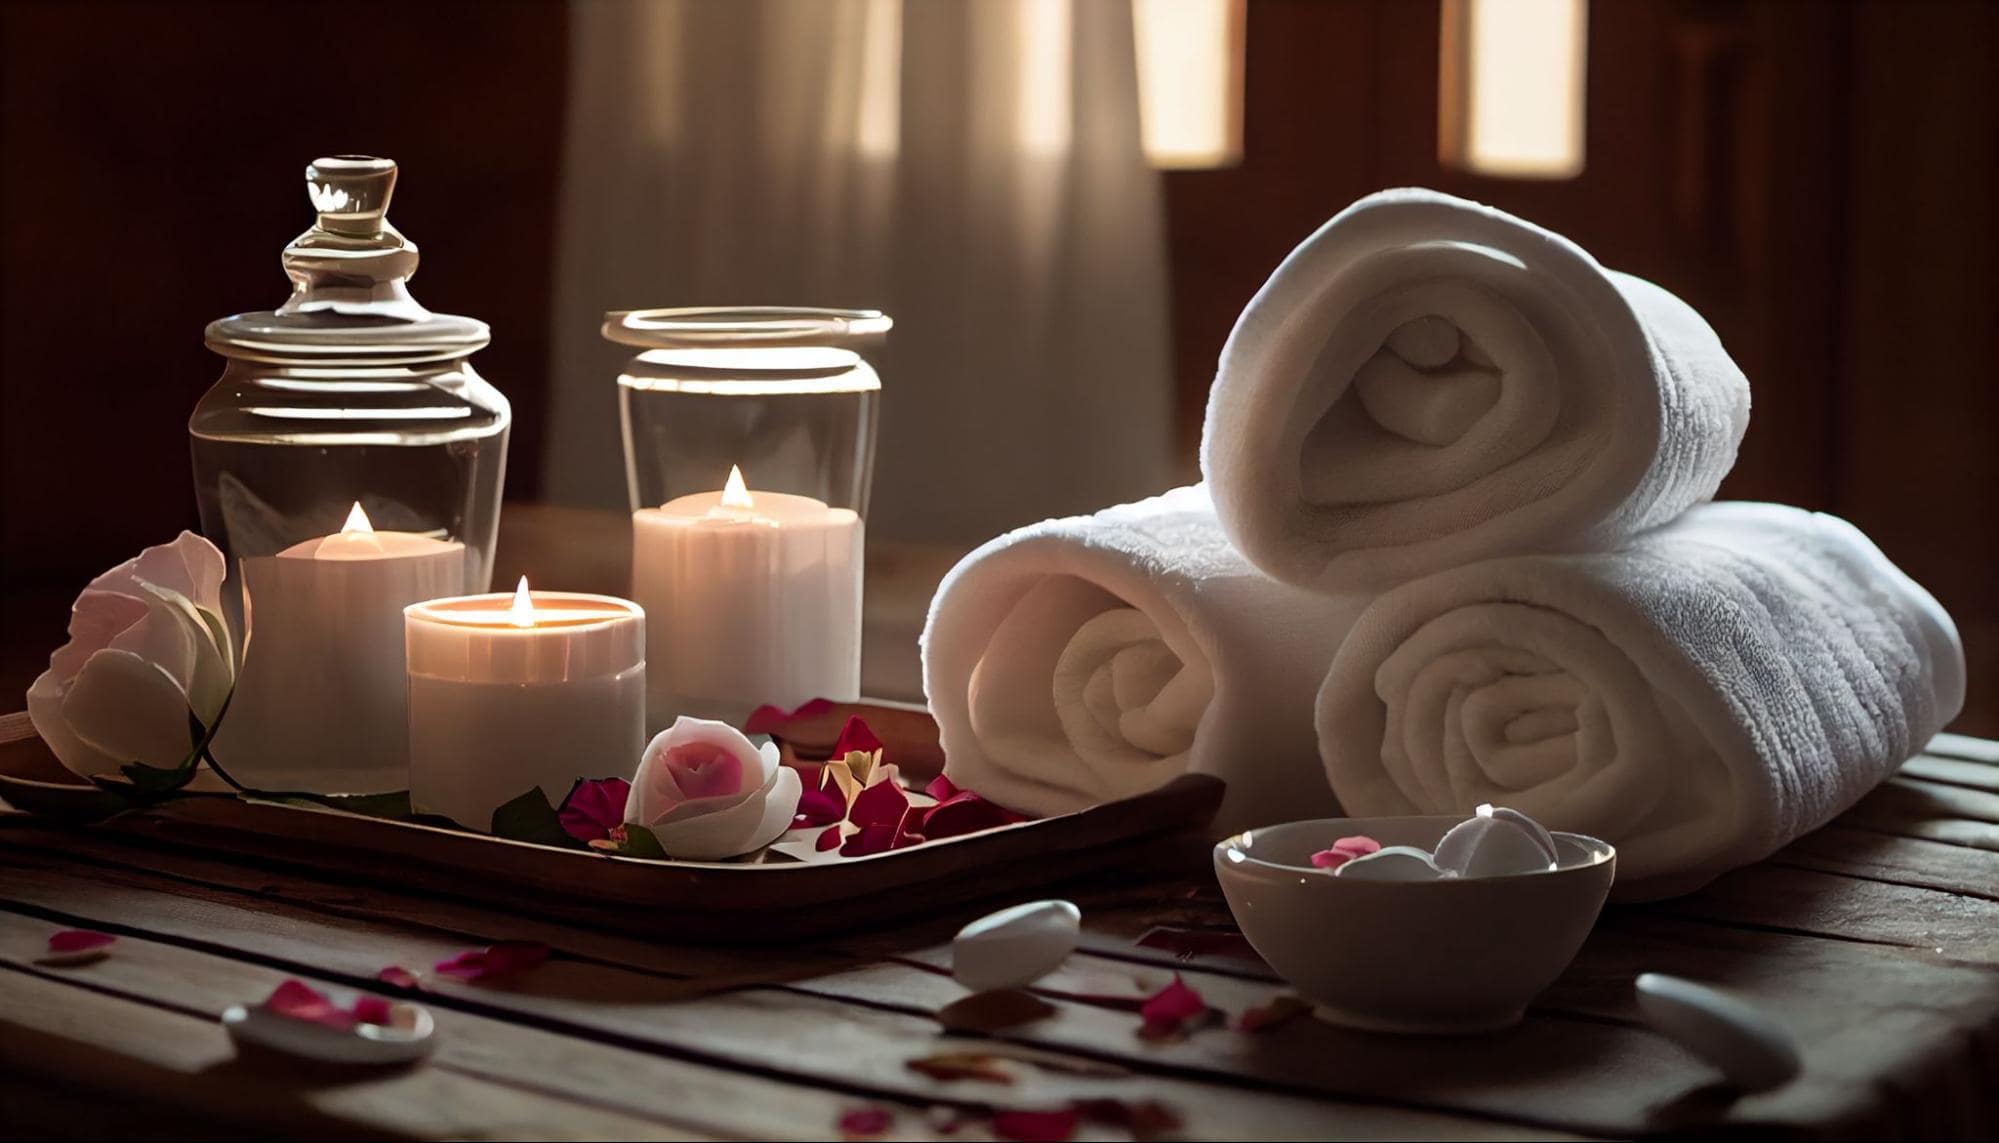 Spa day at home with candles—relaxing romantic gift idea for your girlfriend